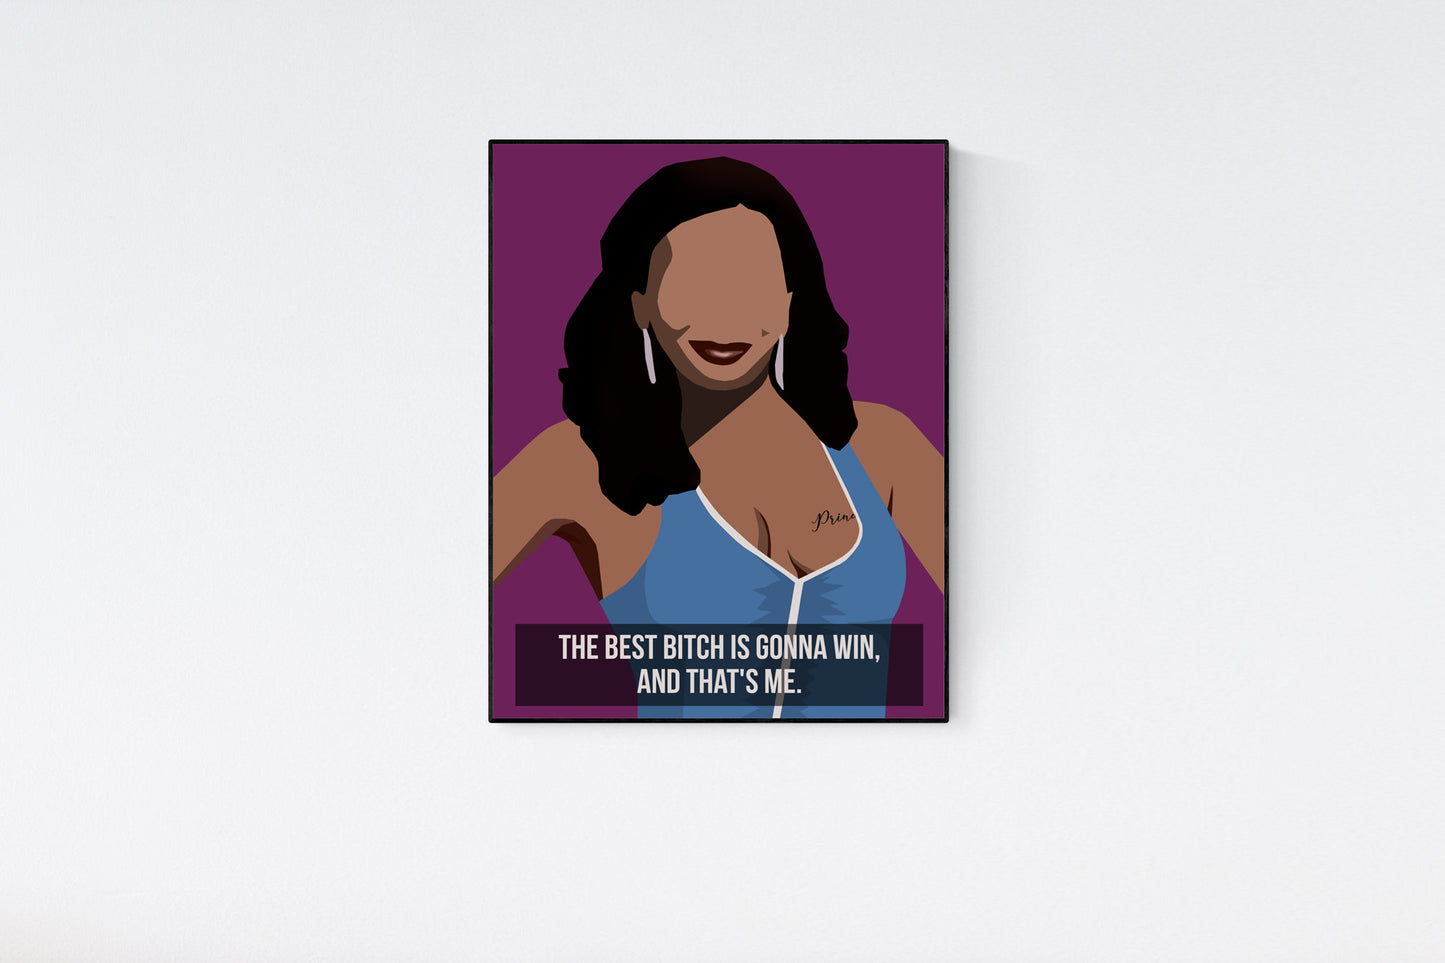 "The best bitch is gonna win, and that's me." - Tiffany "New York" Pollard from VH1 I Love New York and Flavor of Love Quote Fan Poster